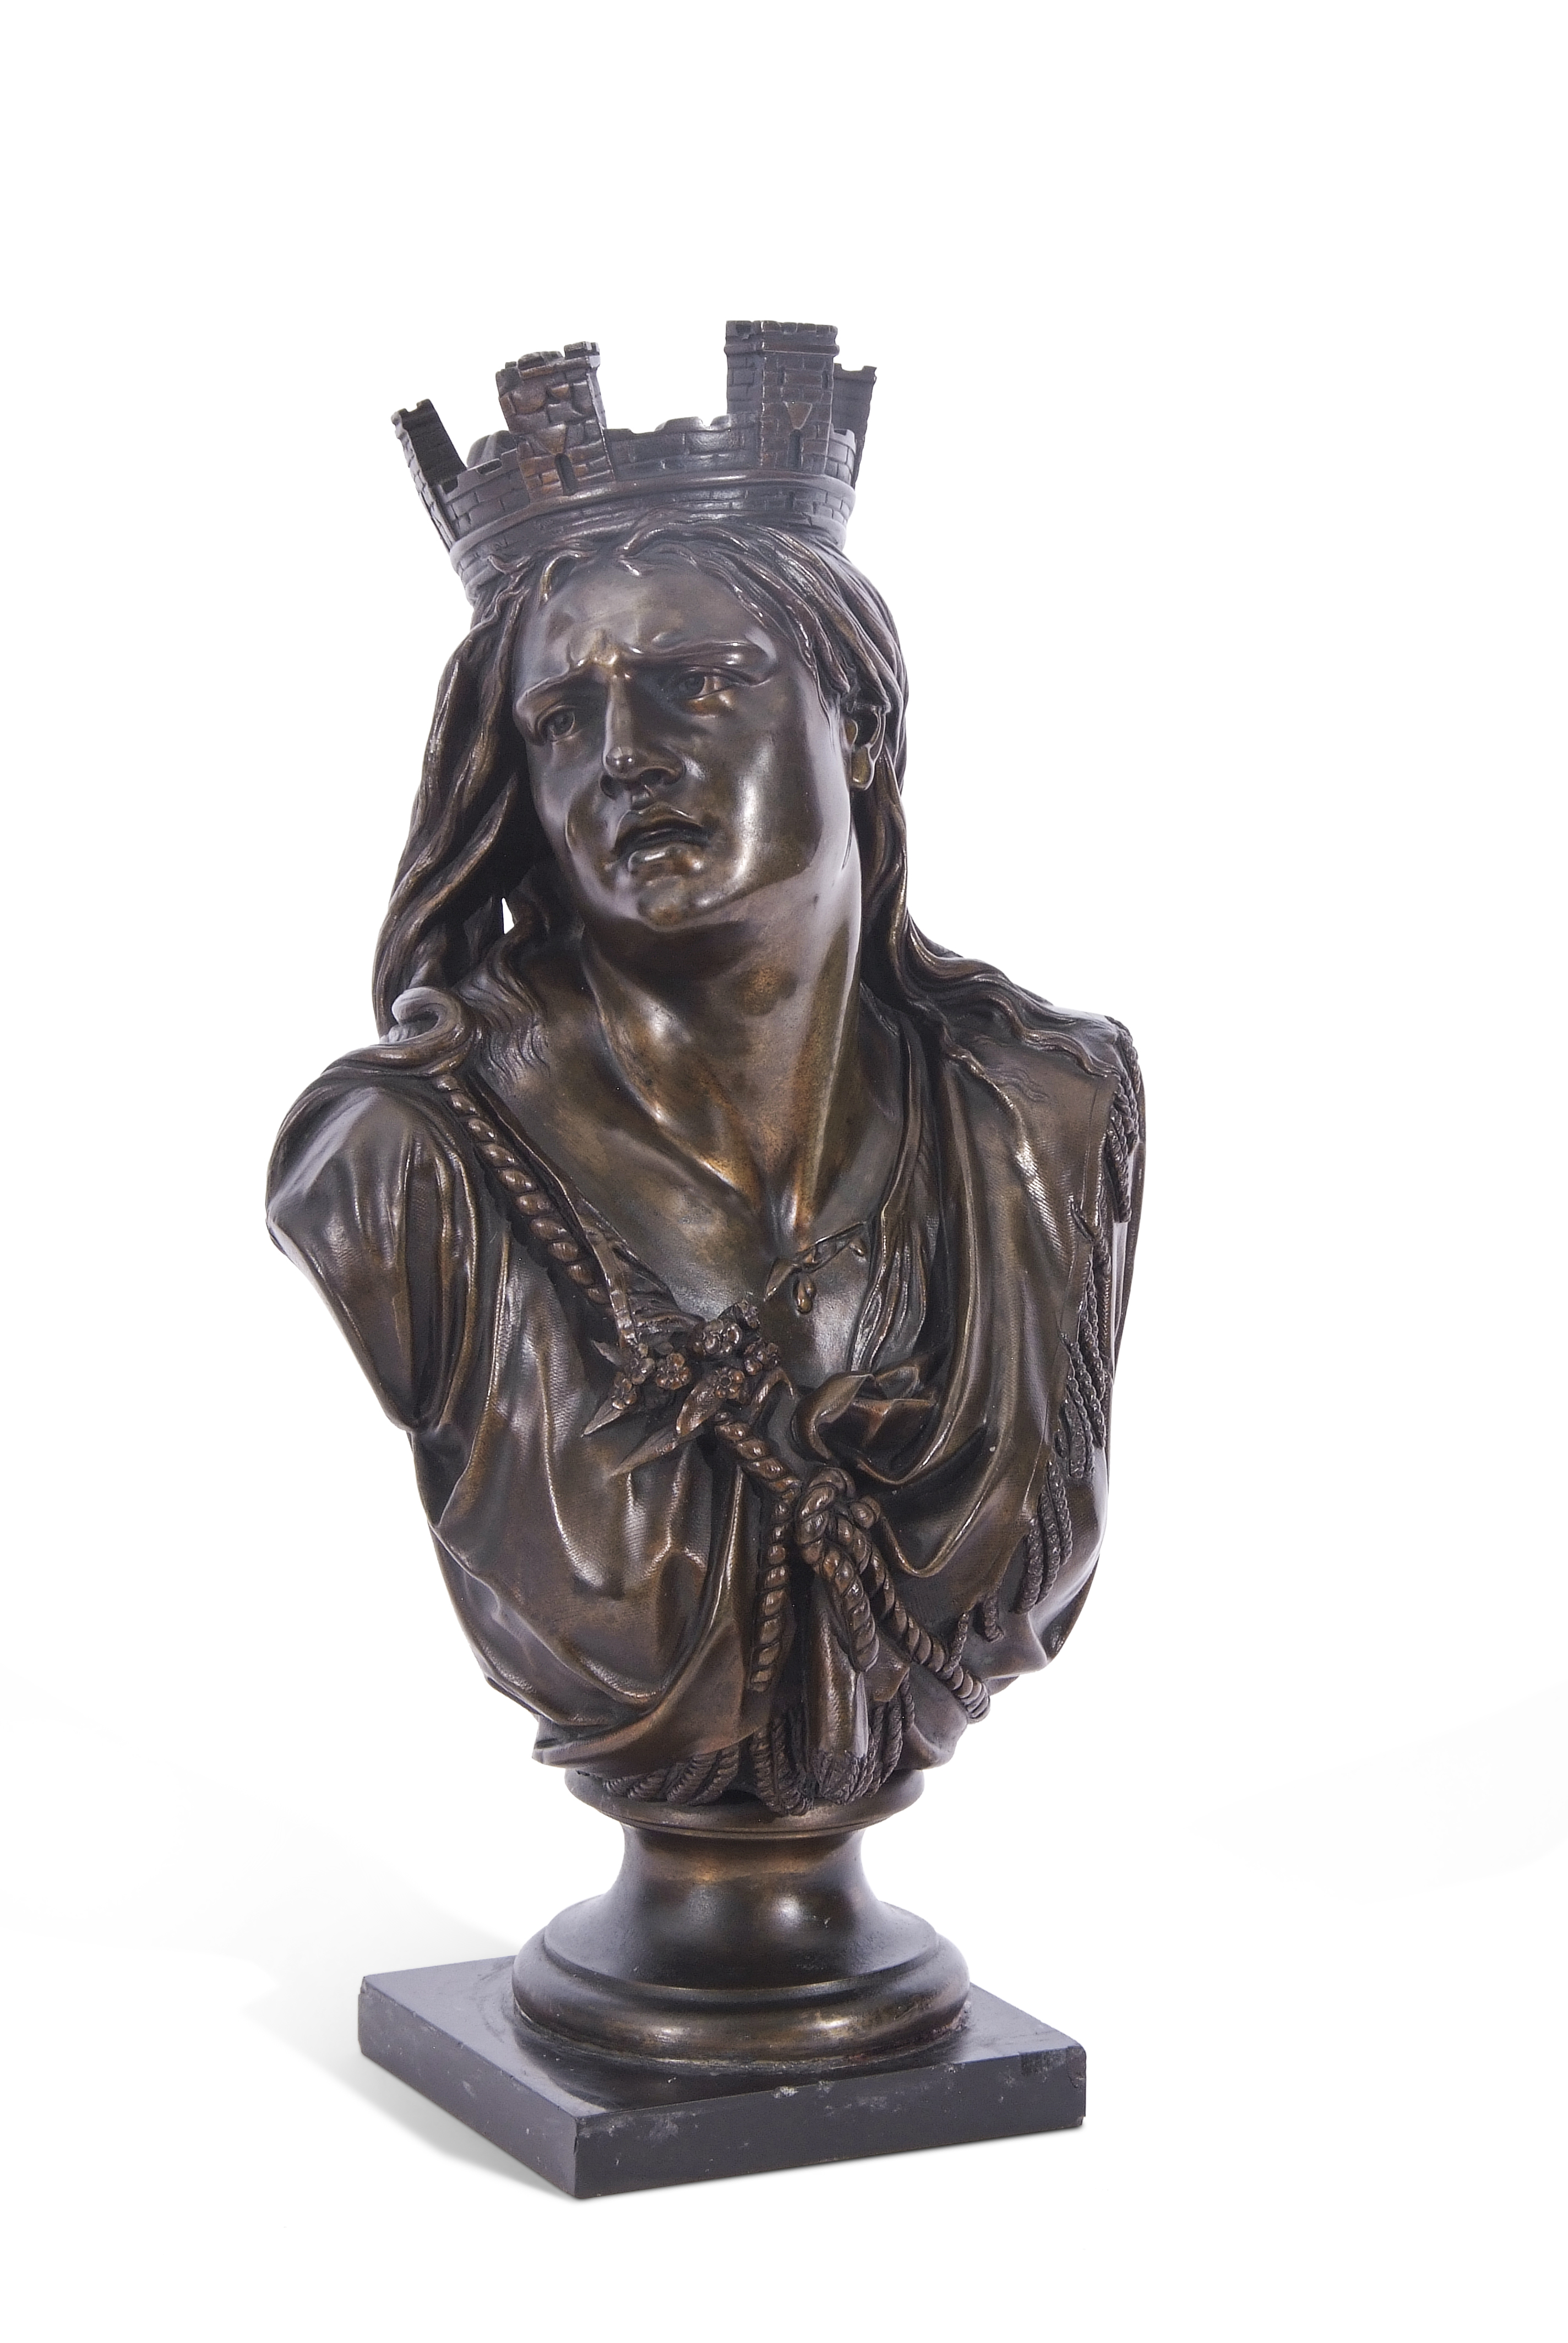 Bronze half-length sculpture depicting the Iceni warrior Queen Boudicca, crowned with a ruined